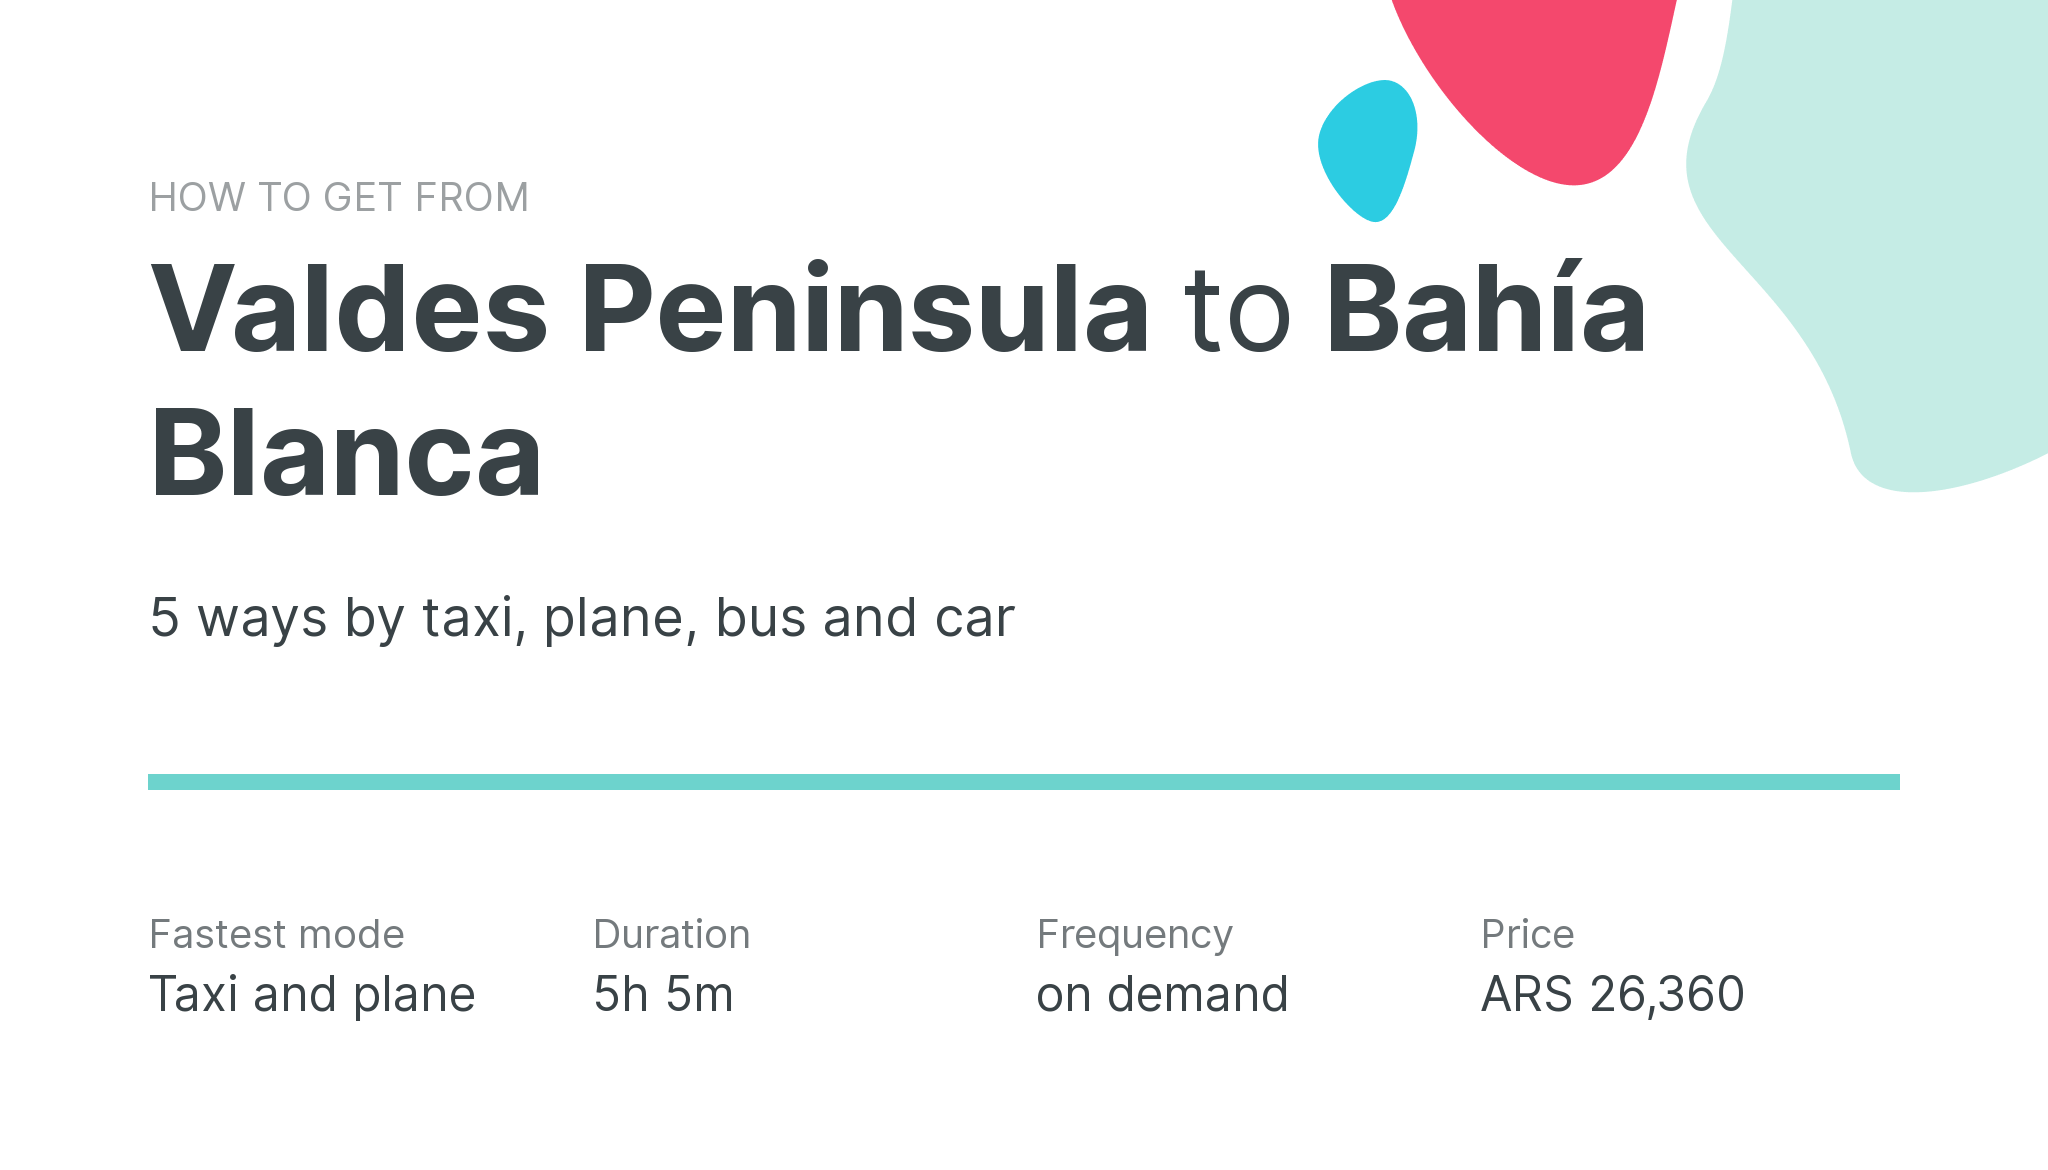 How do I get from Valdes Peninsula to Bahía Blanca